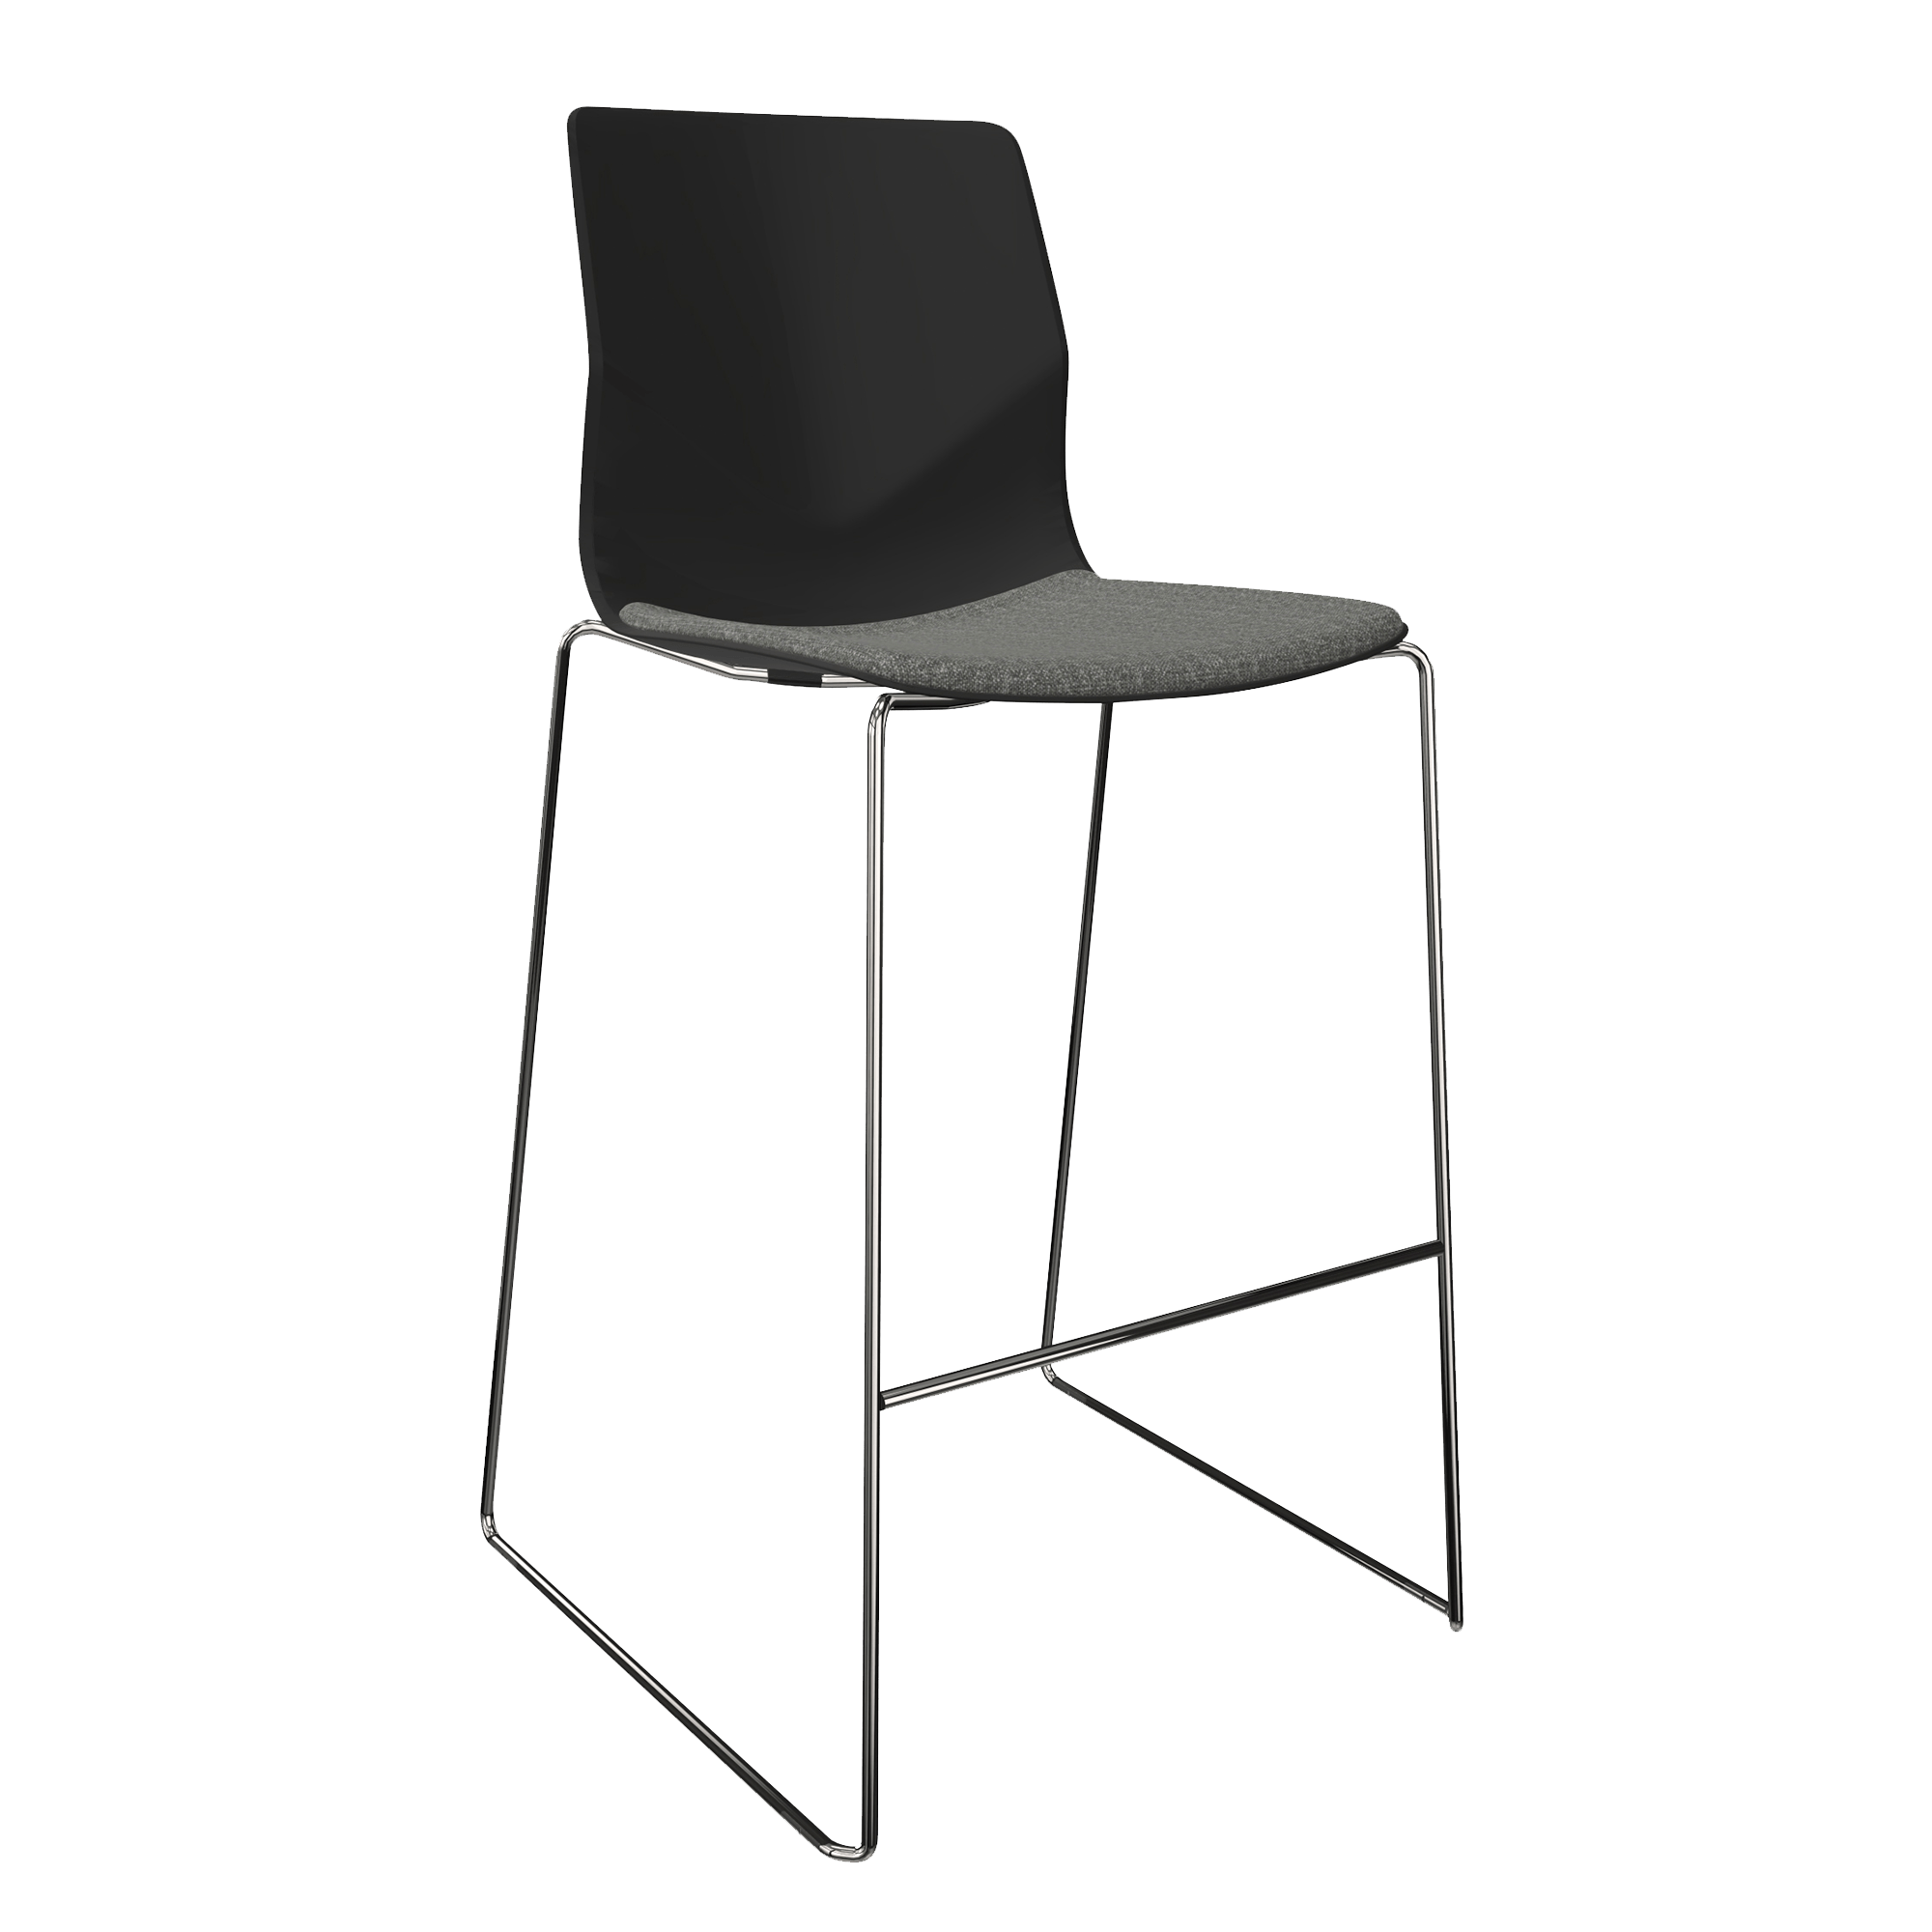 A black counter chair with 2 chrome legs